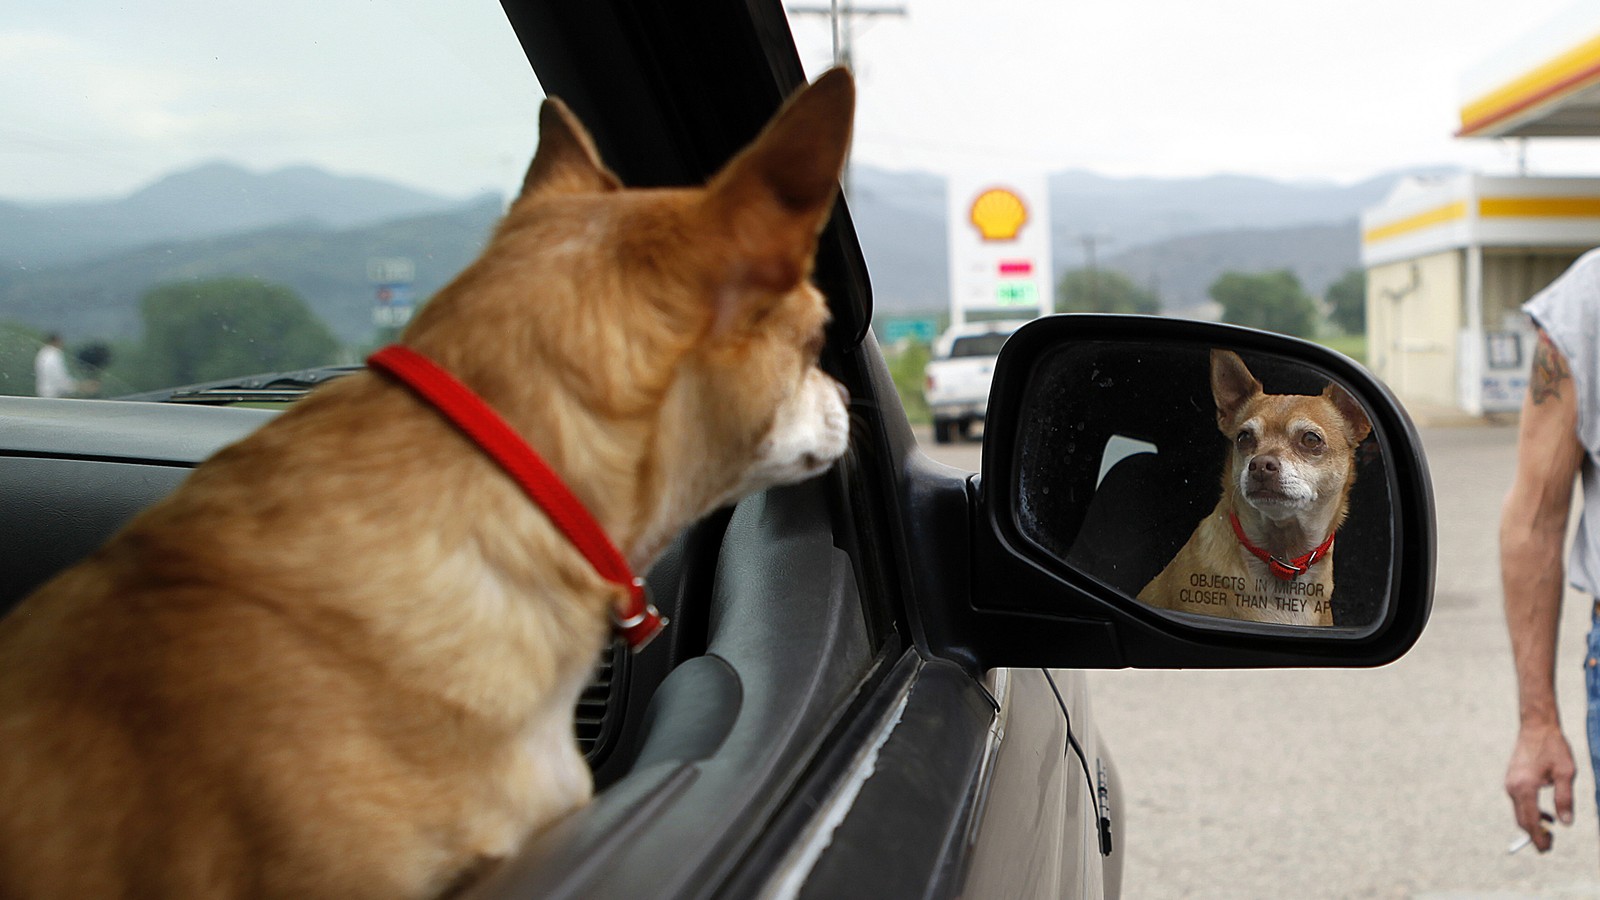 Can dogs recognize themselves in a mirror?